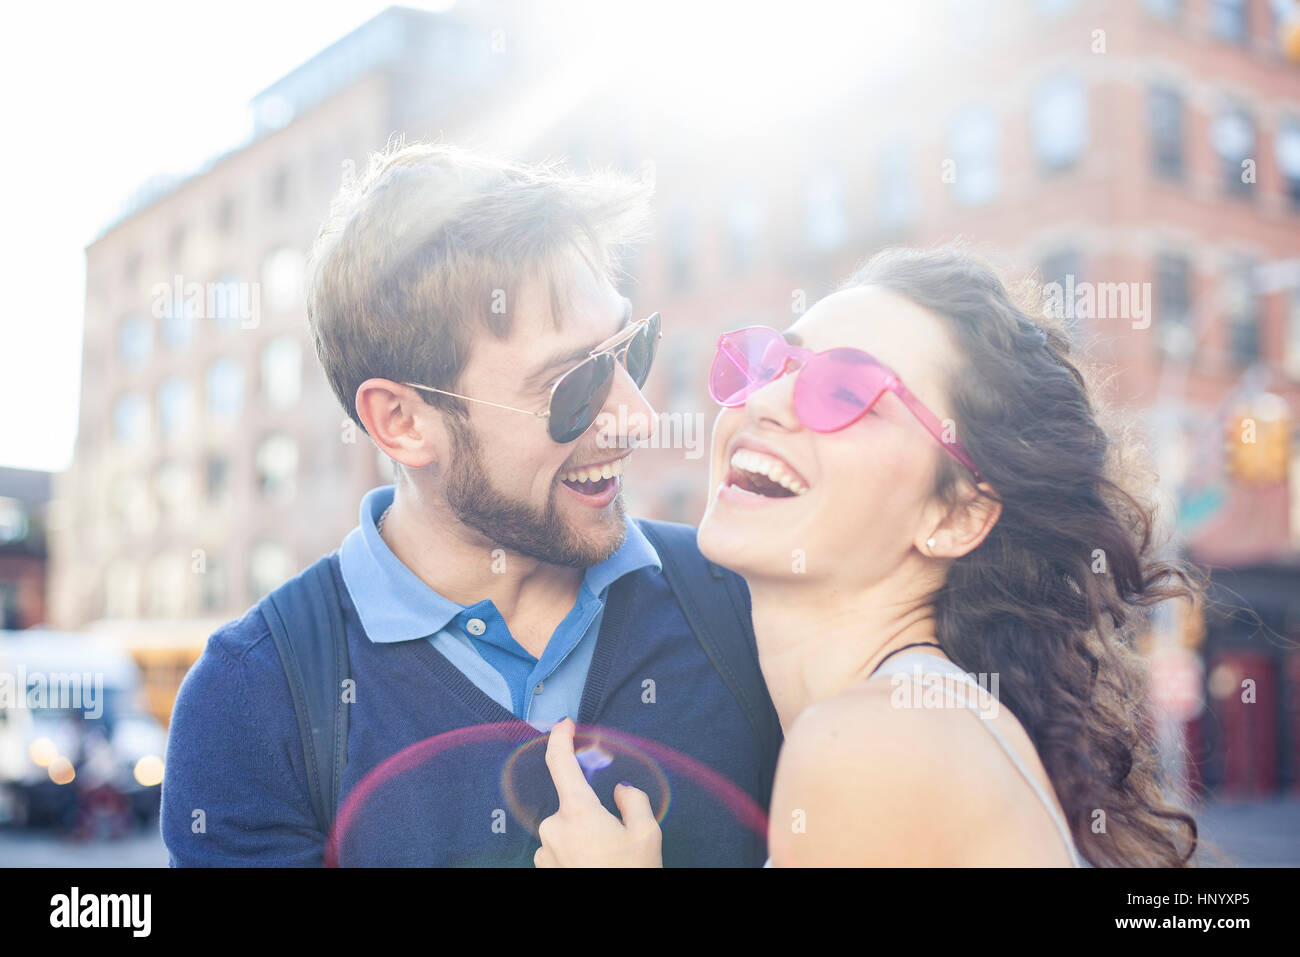 Couple laughing together outdoors Stock Photo